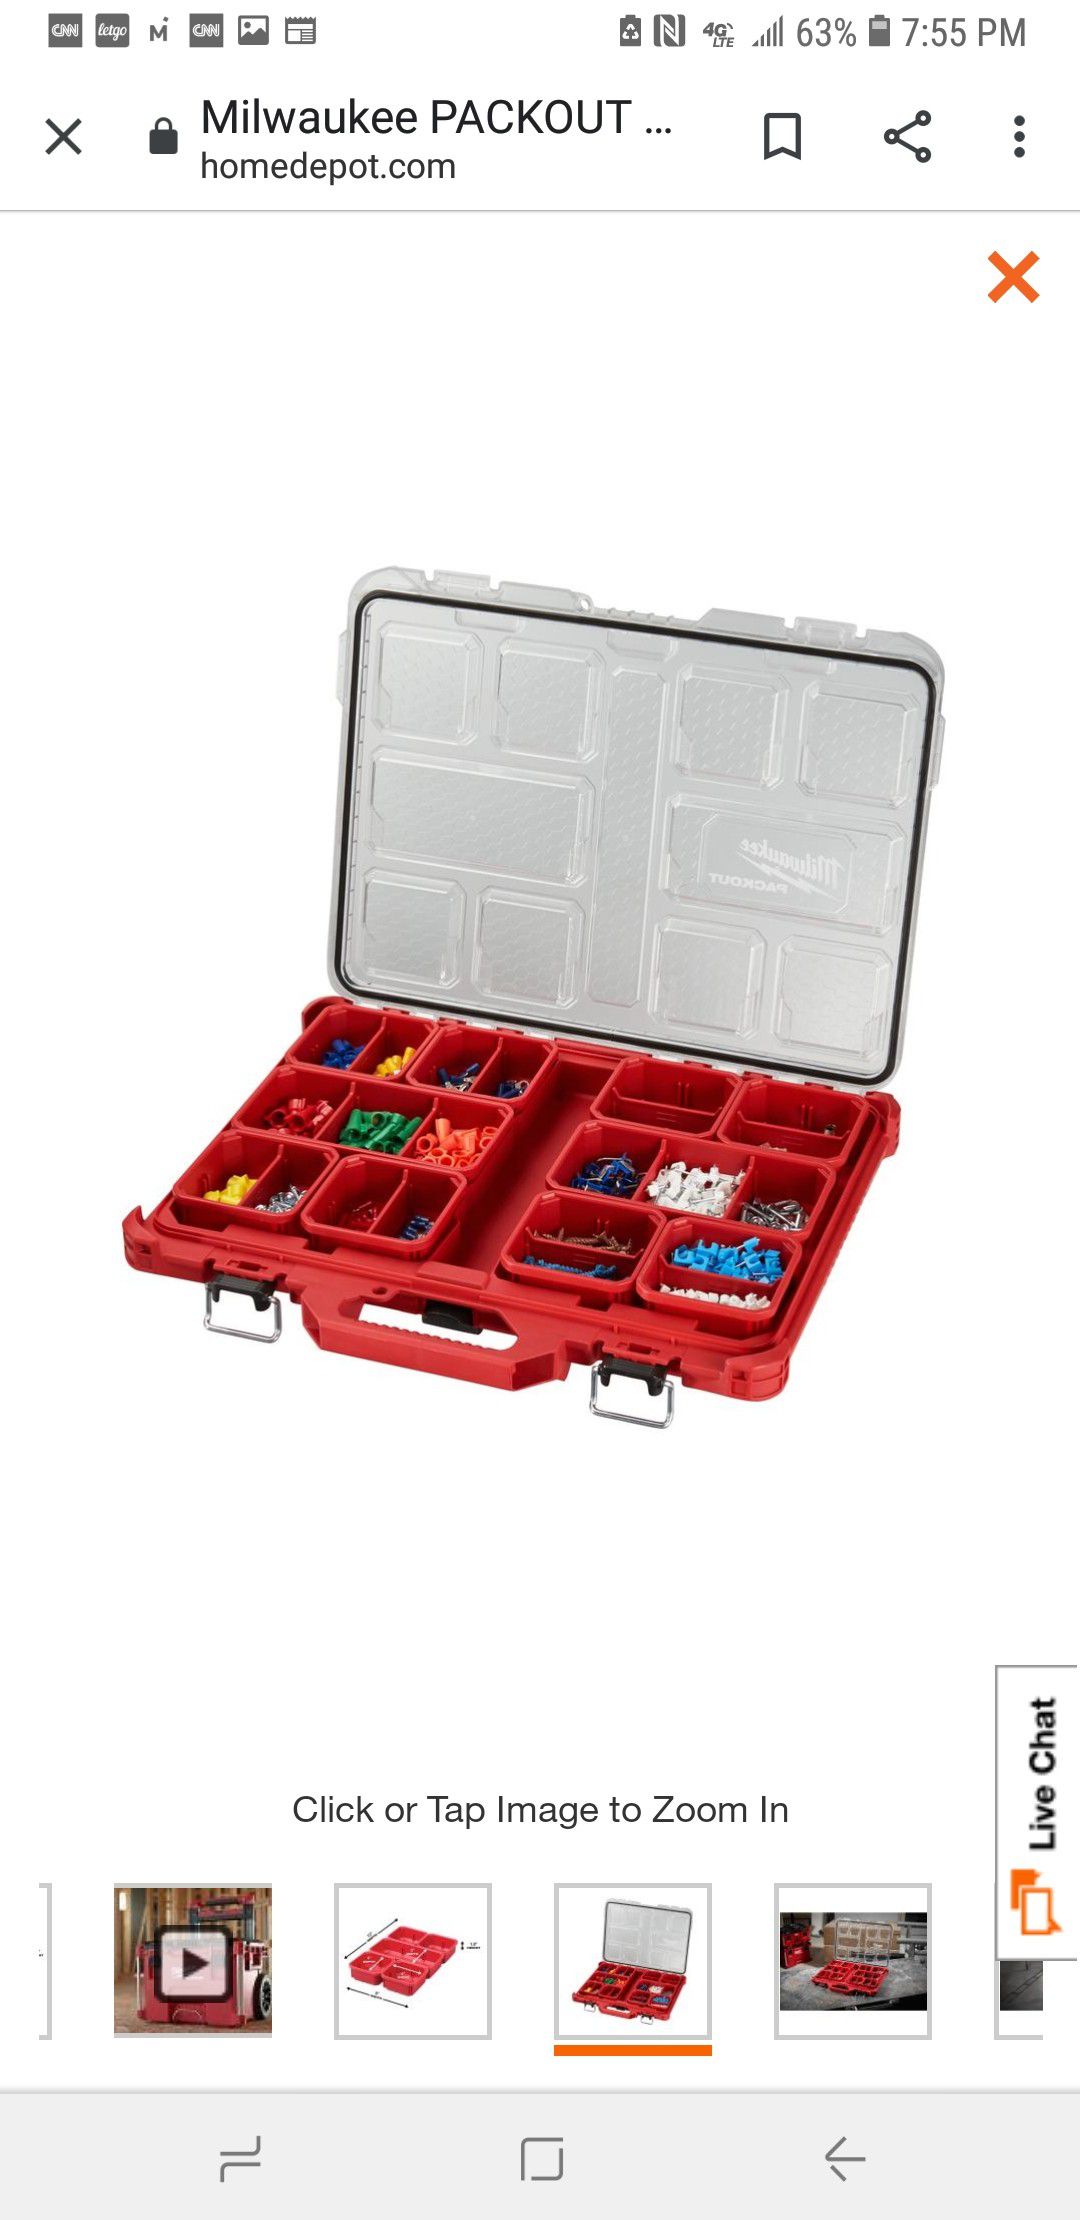 100s of Milwaukee packout thin organizers $25ea